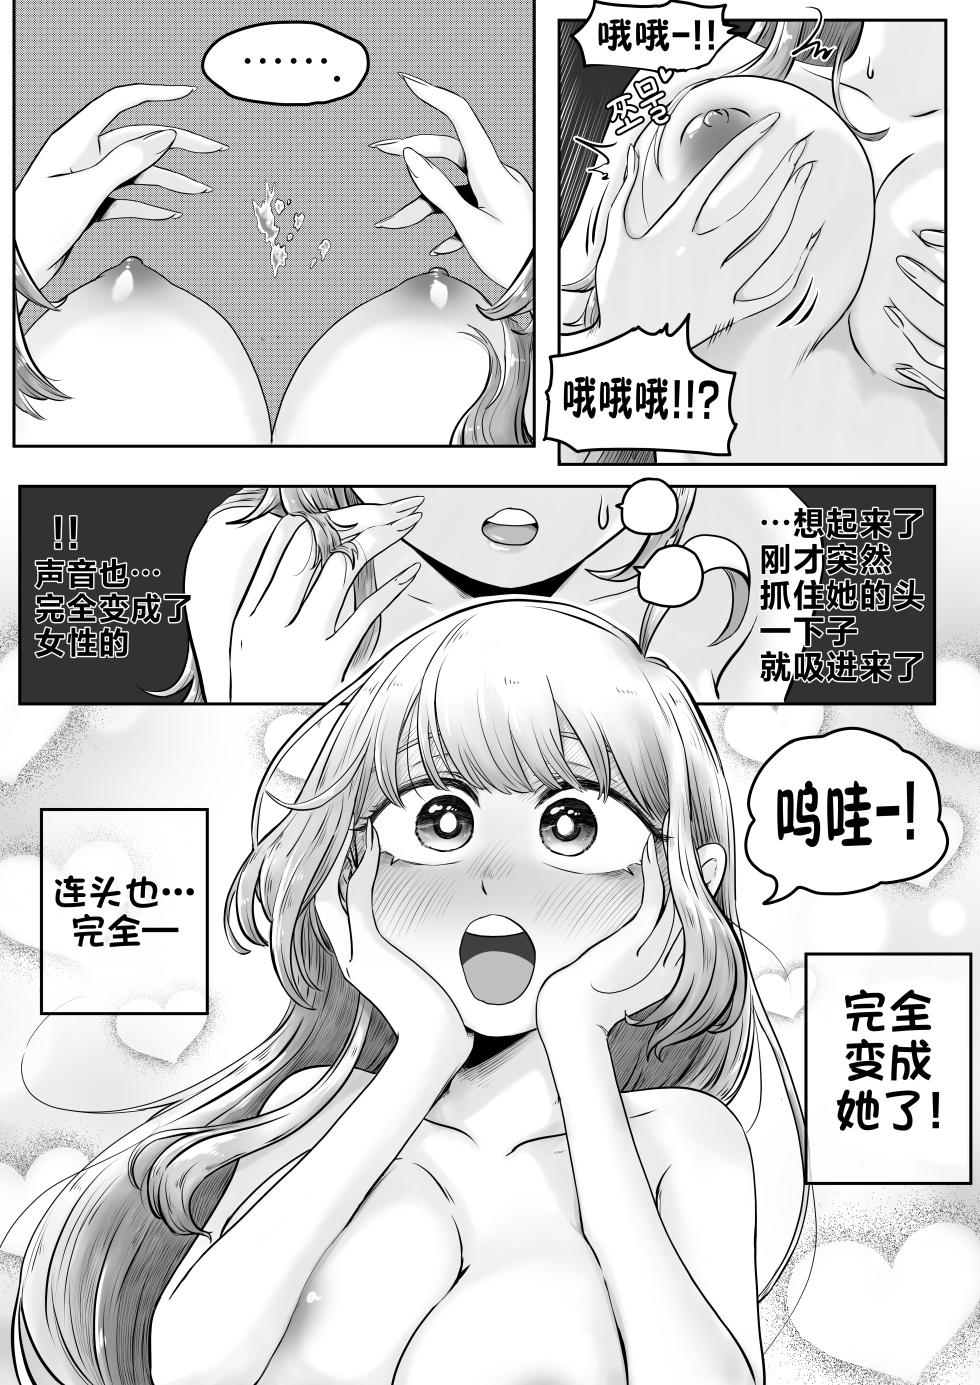 [Duckgu] Your Body Is Good [Chinese] [不咕鸟汉化组] - Page 11